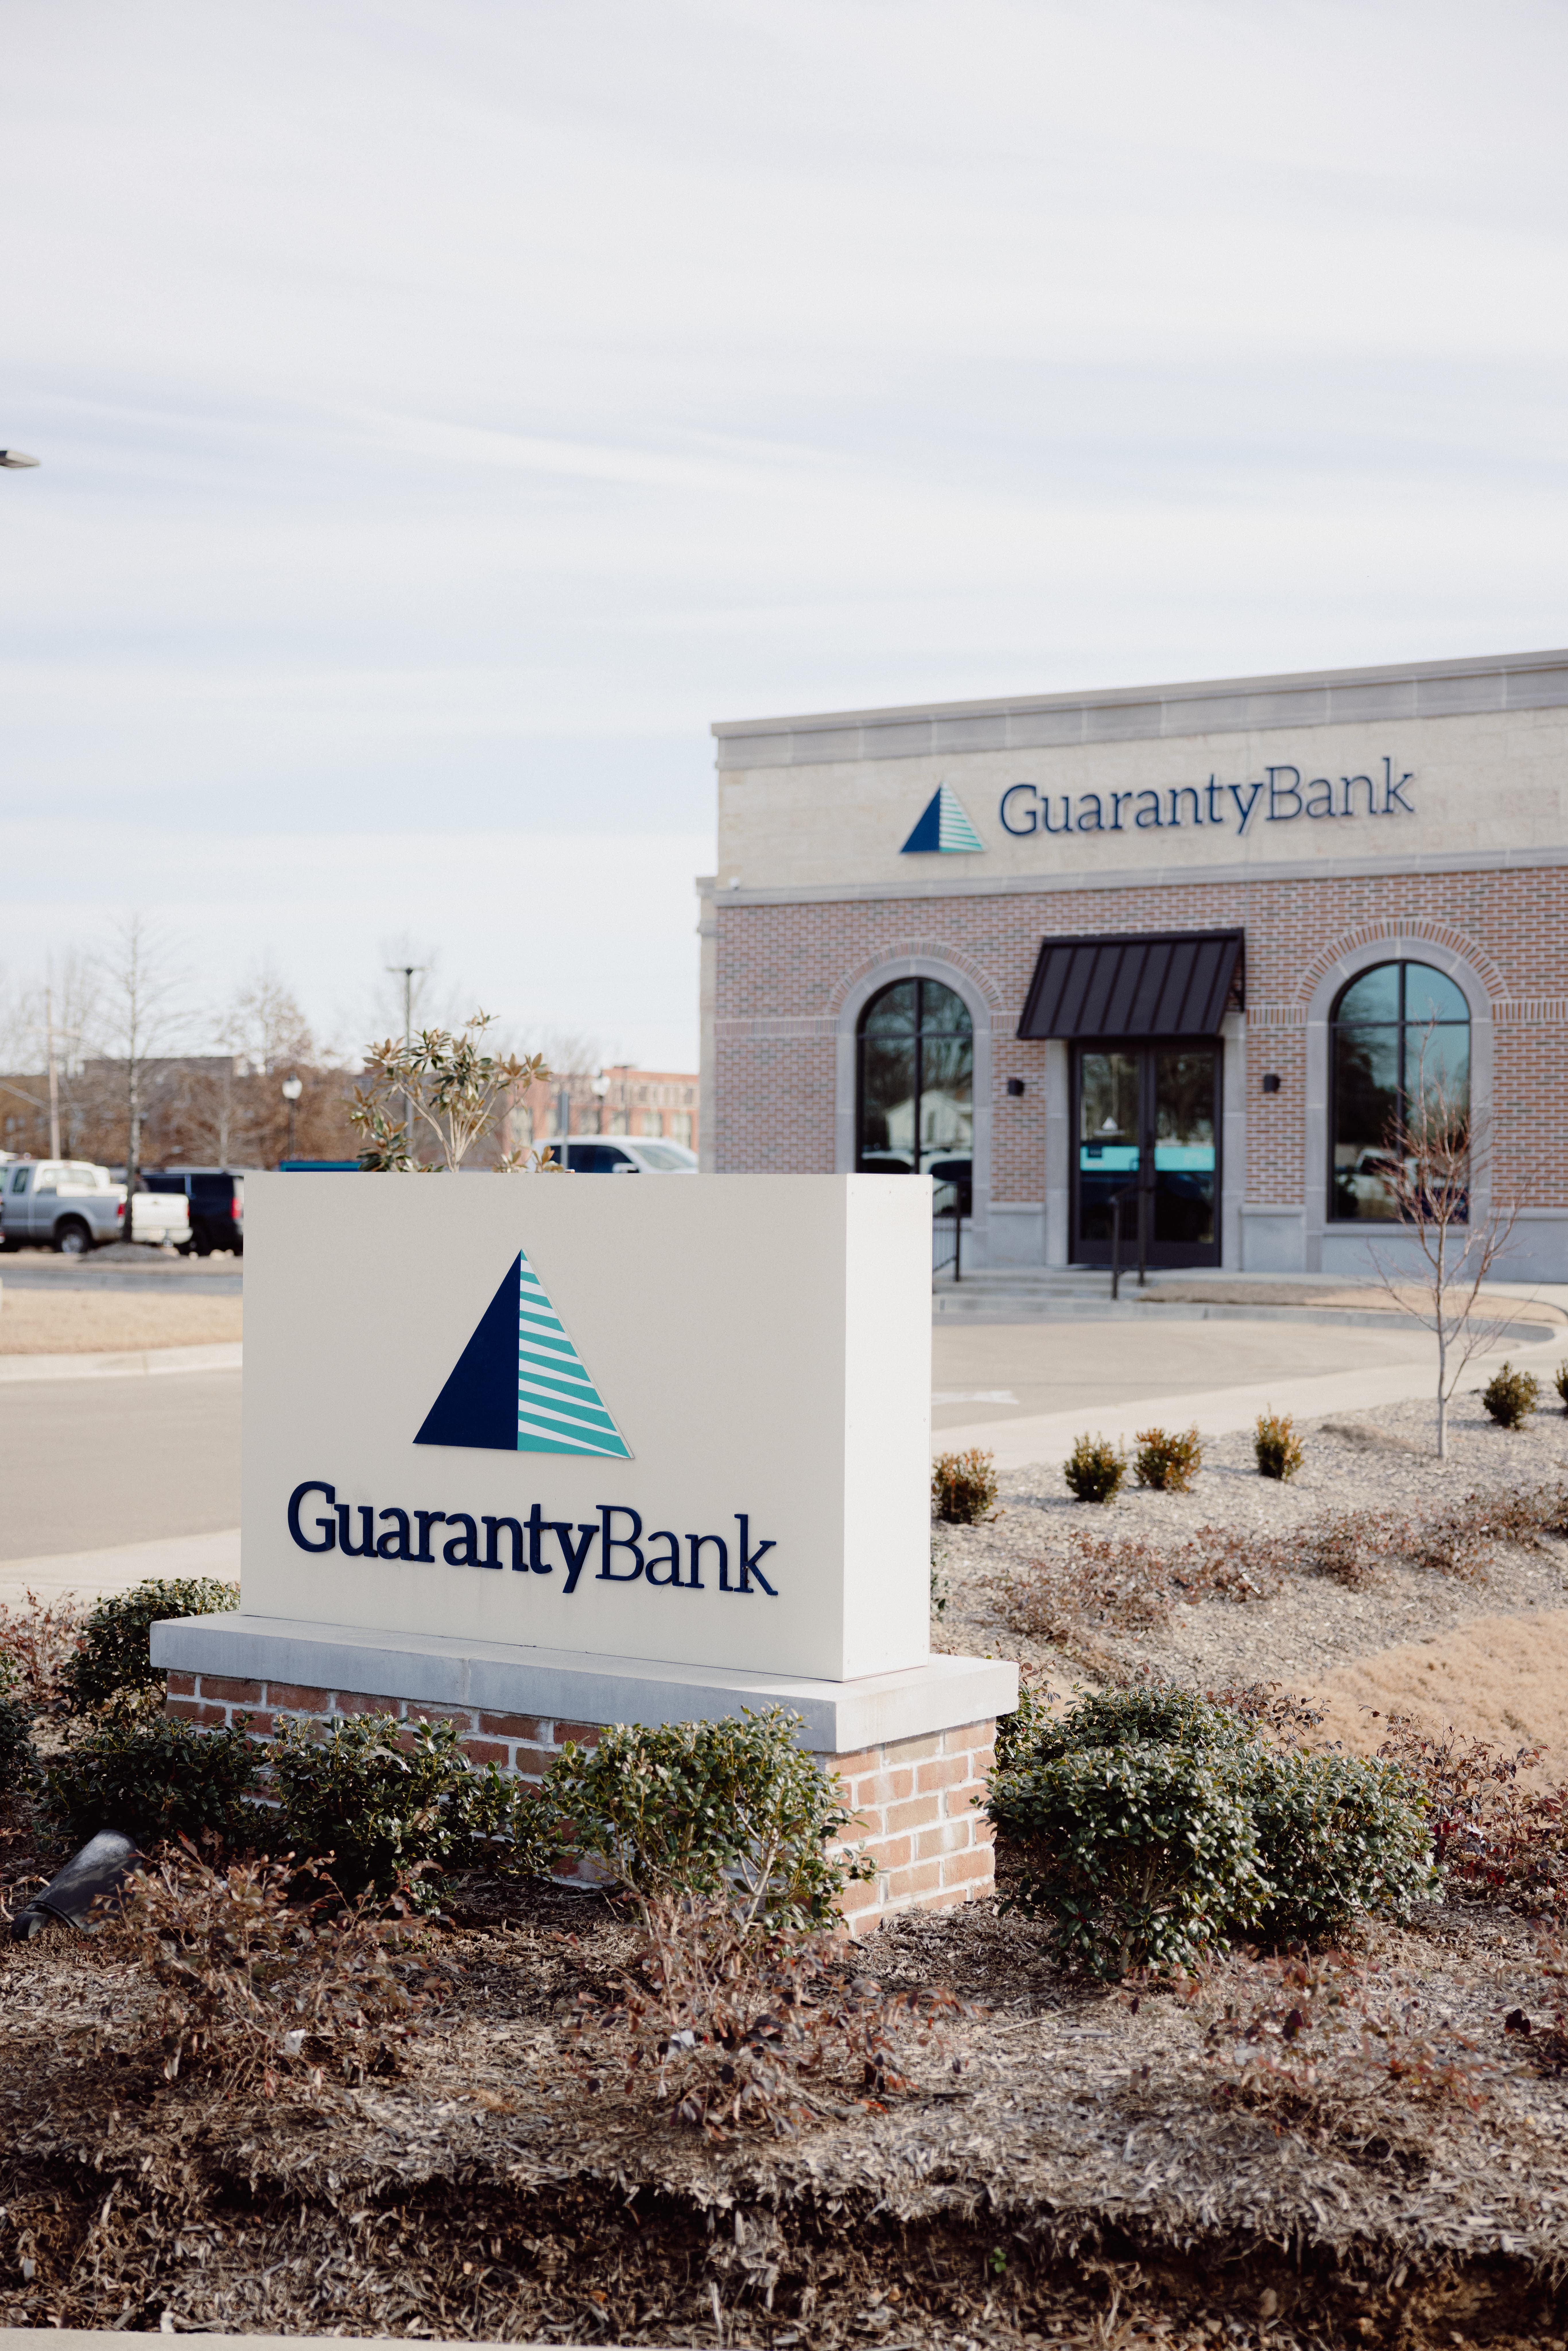 Guaranty Bank signage in front of the bank building.